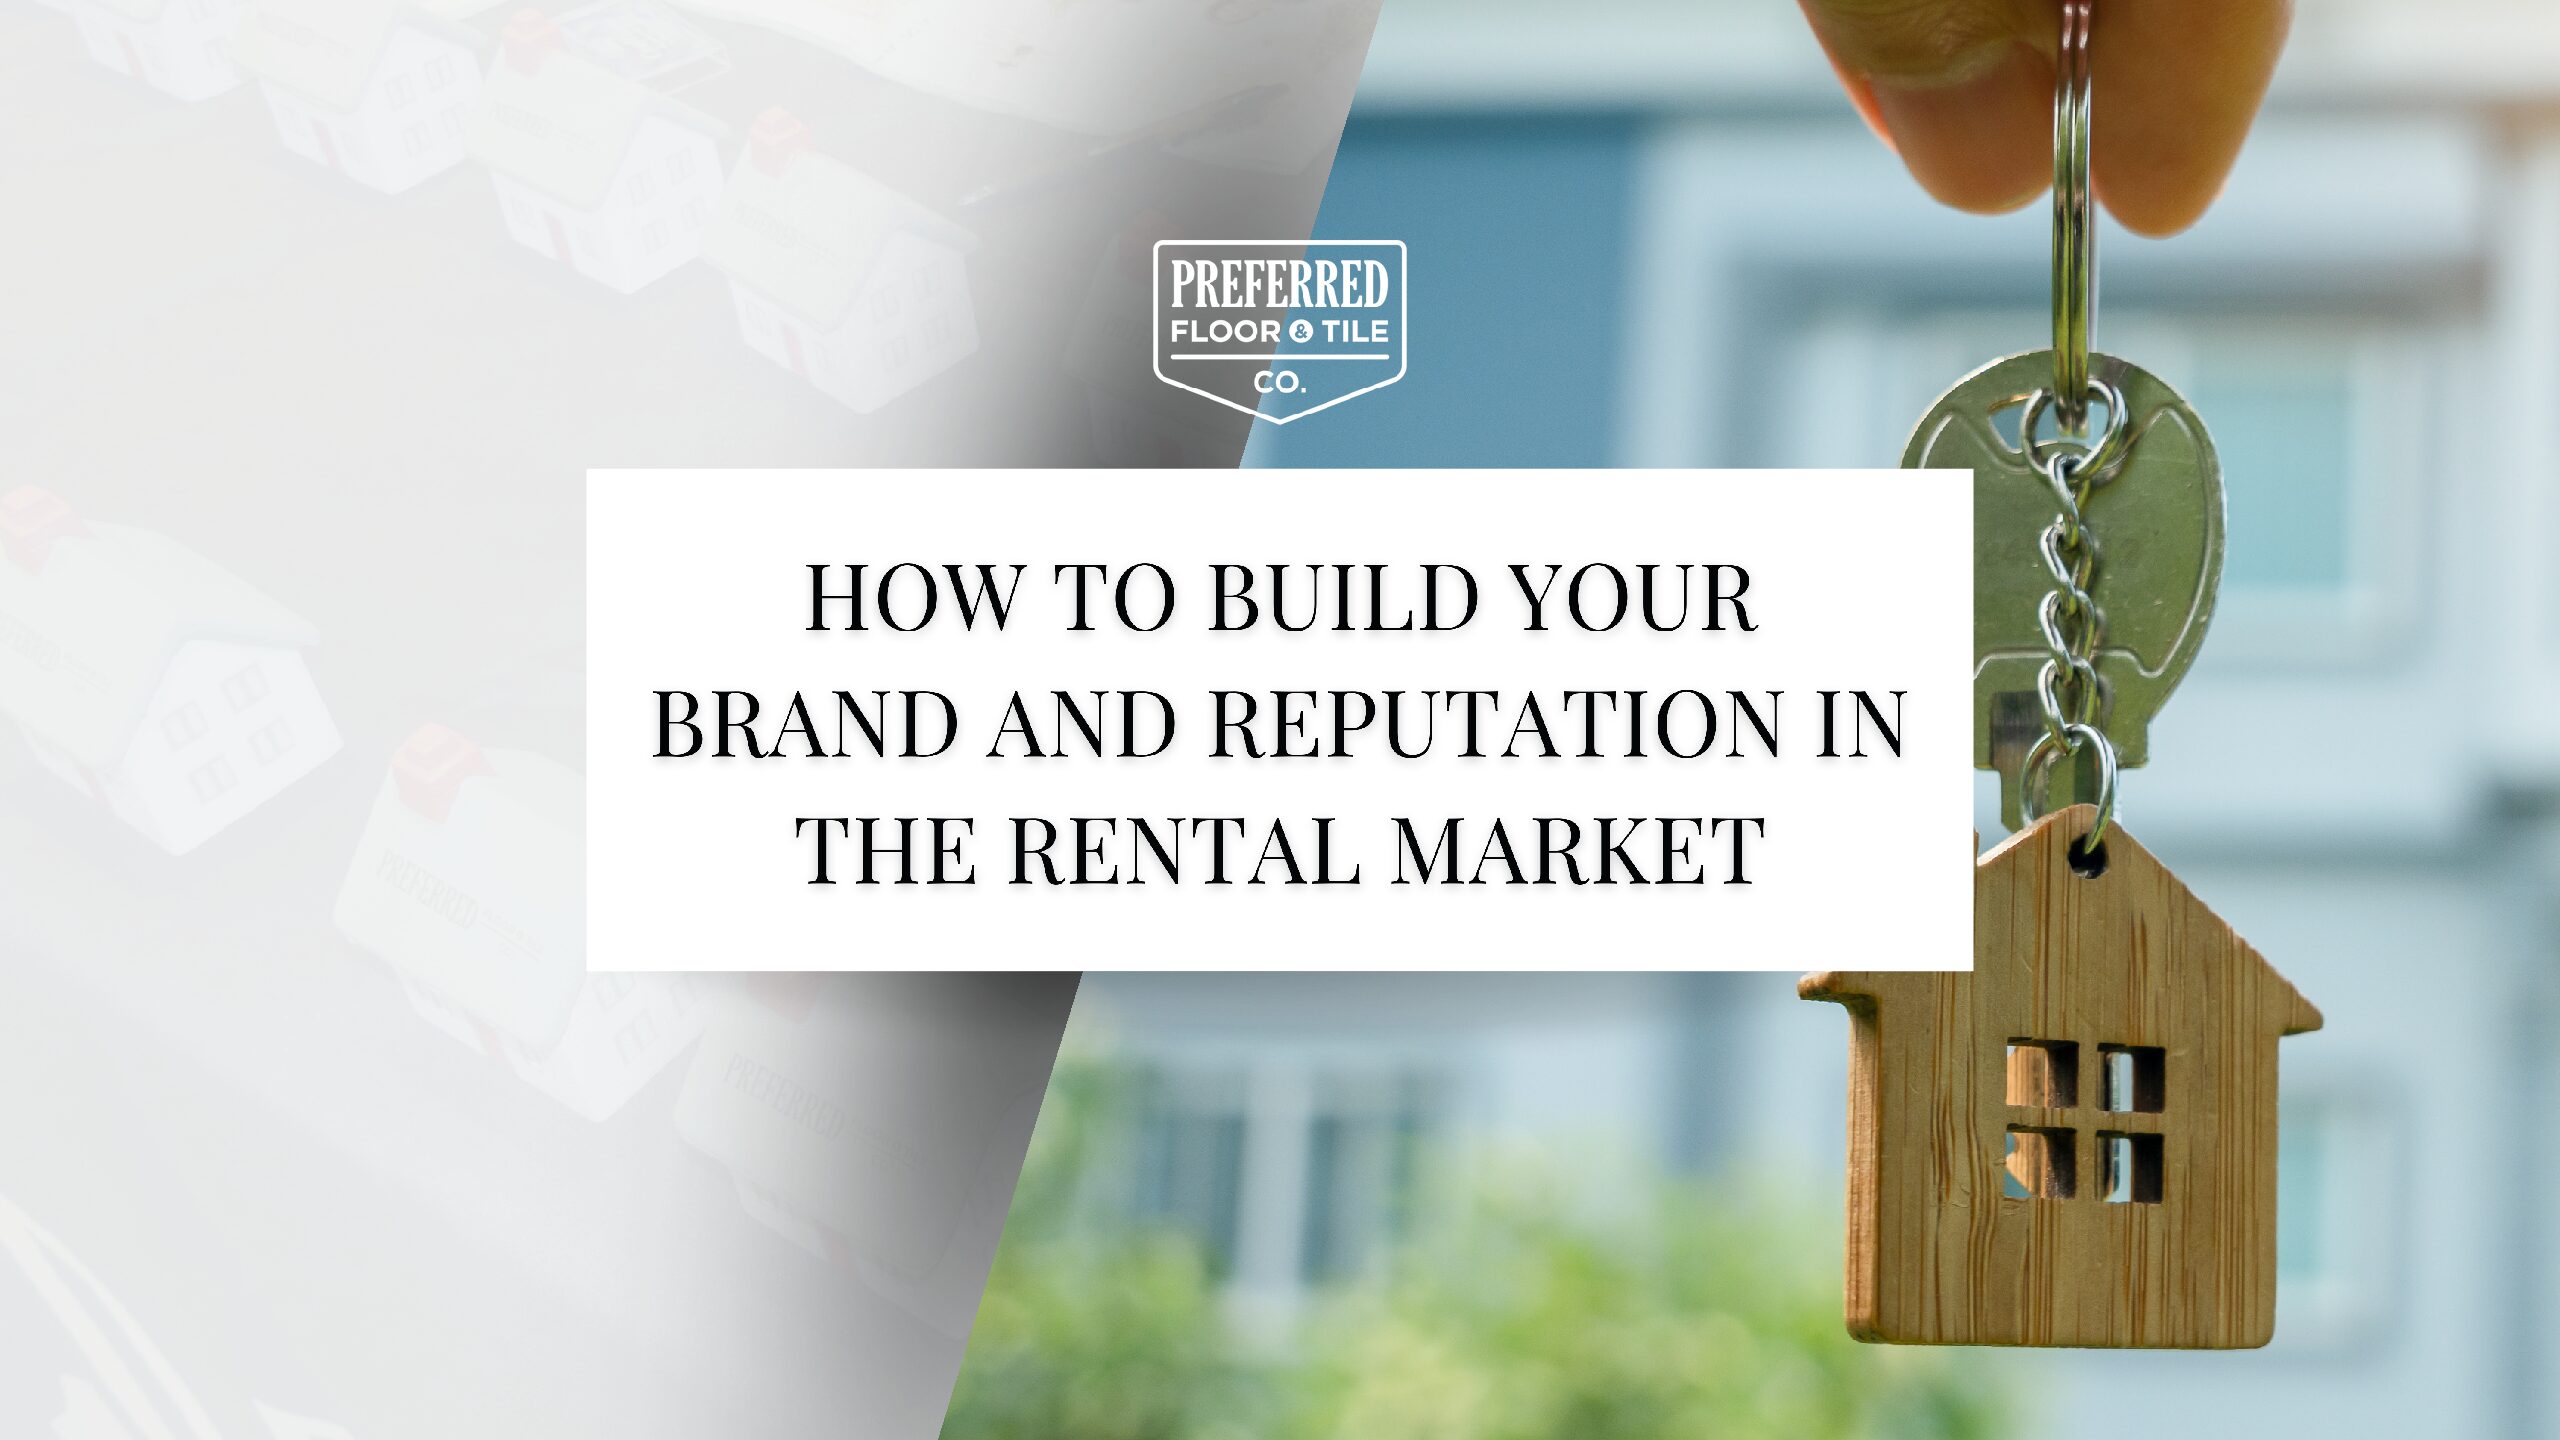 How to Build Your Brand and Reputation in the Rental Market